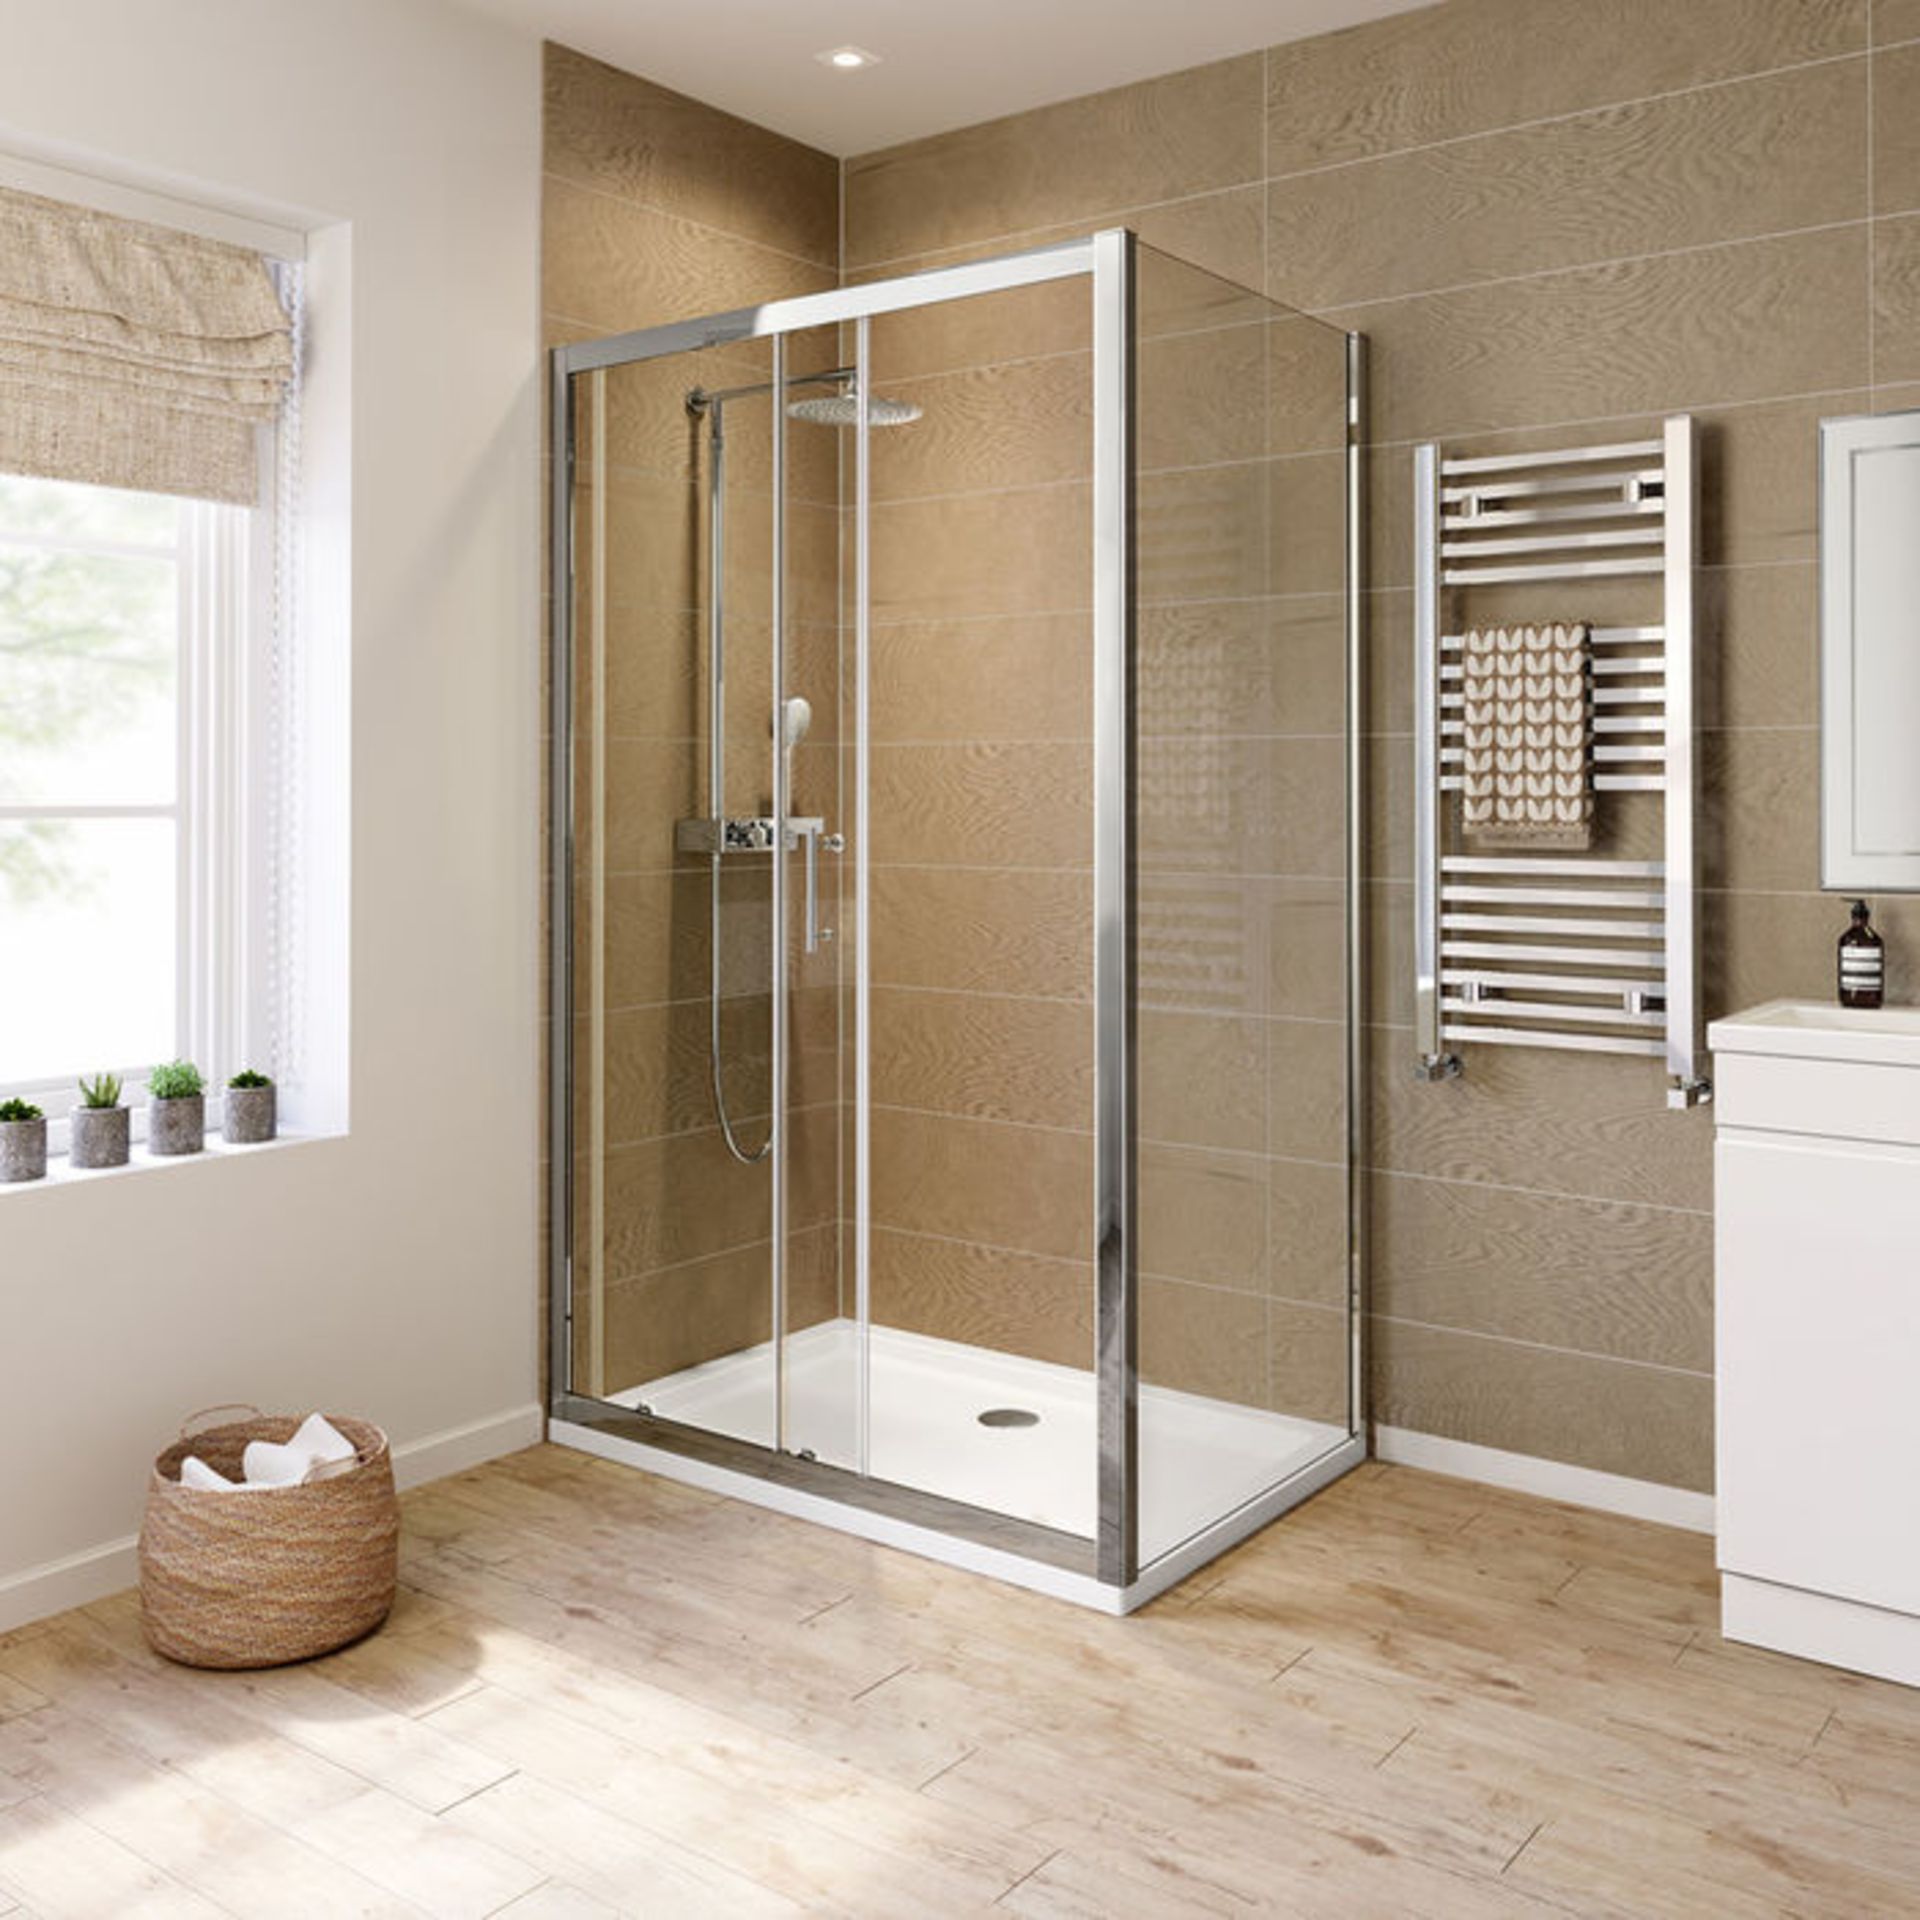 (AD29) 1200x760mm - 6mm - Elements Sliding Door Shower Enclosure. RRP £299.99. 6mm Safety Glass - Image 4 of 4